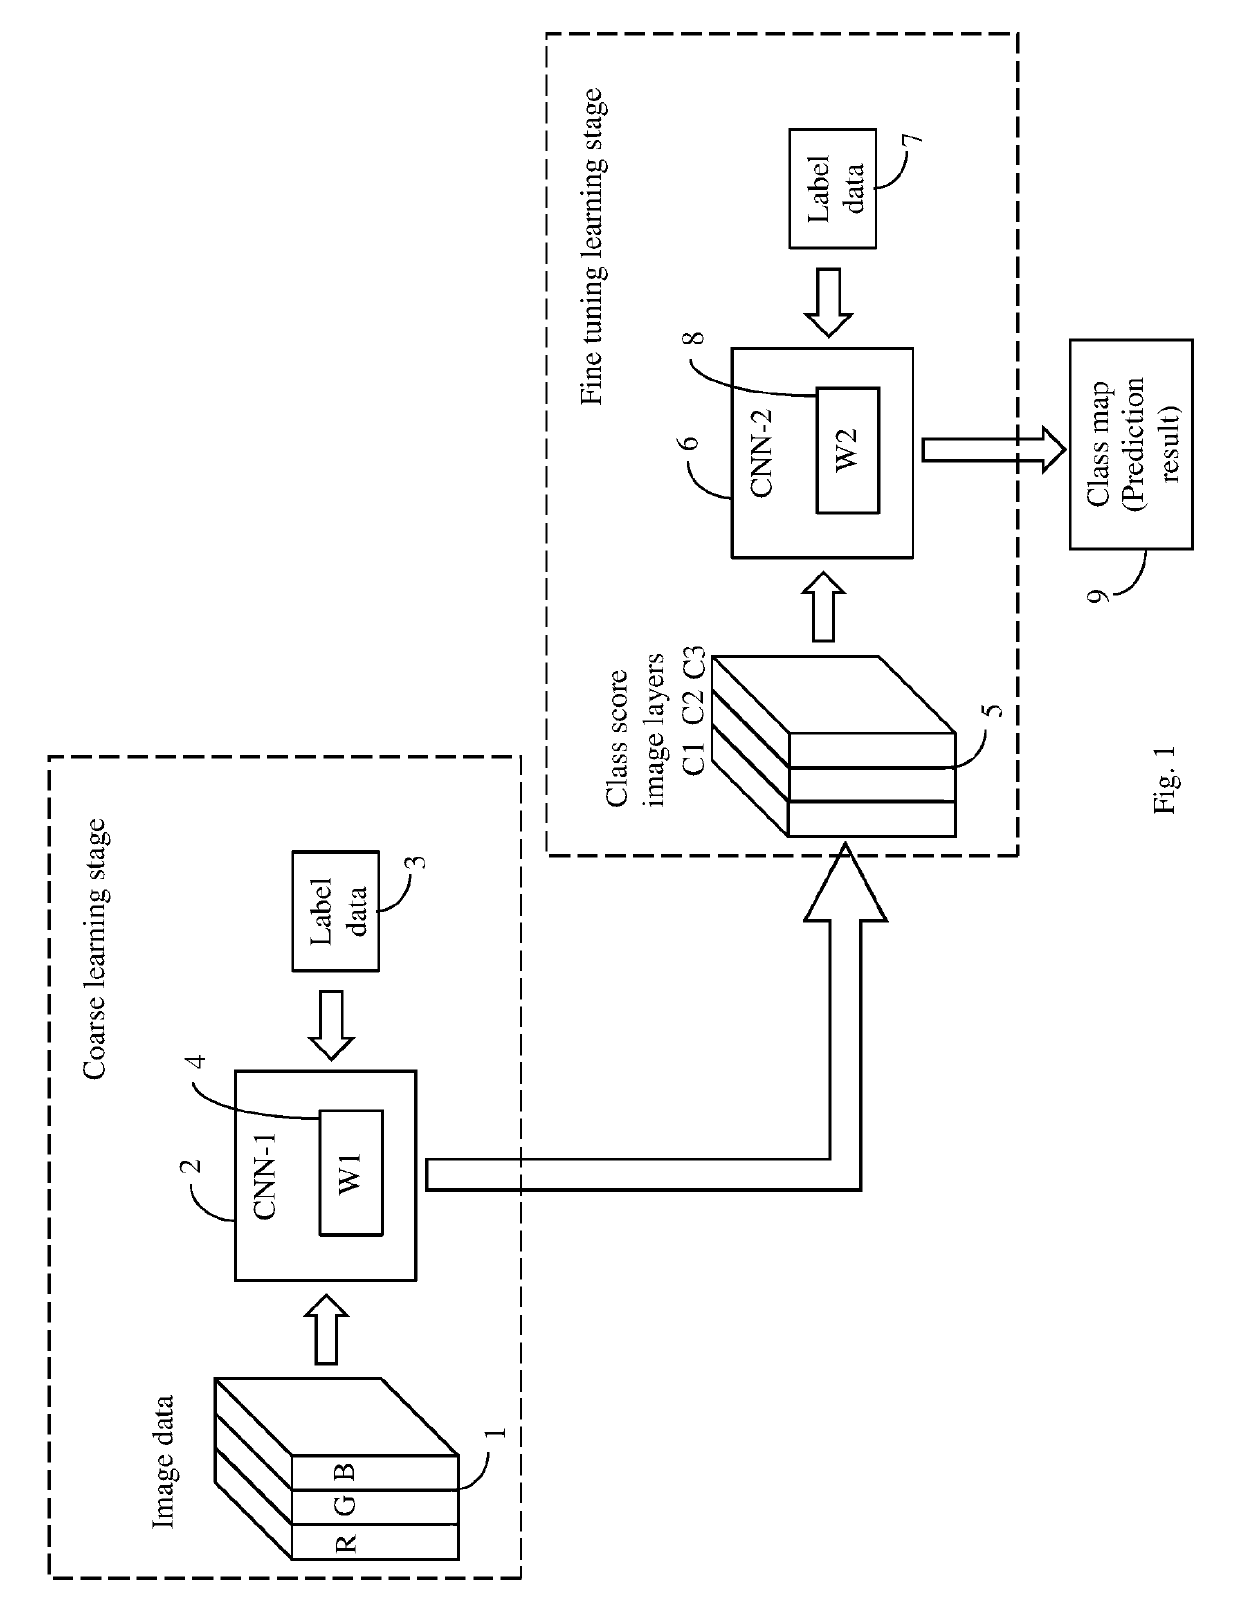 Method and system for cell image segmentation using multi-stage convolutional neural networks